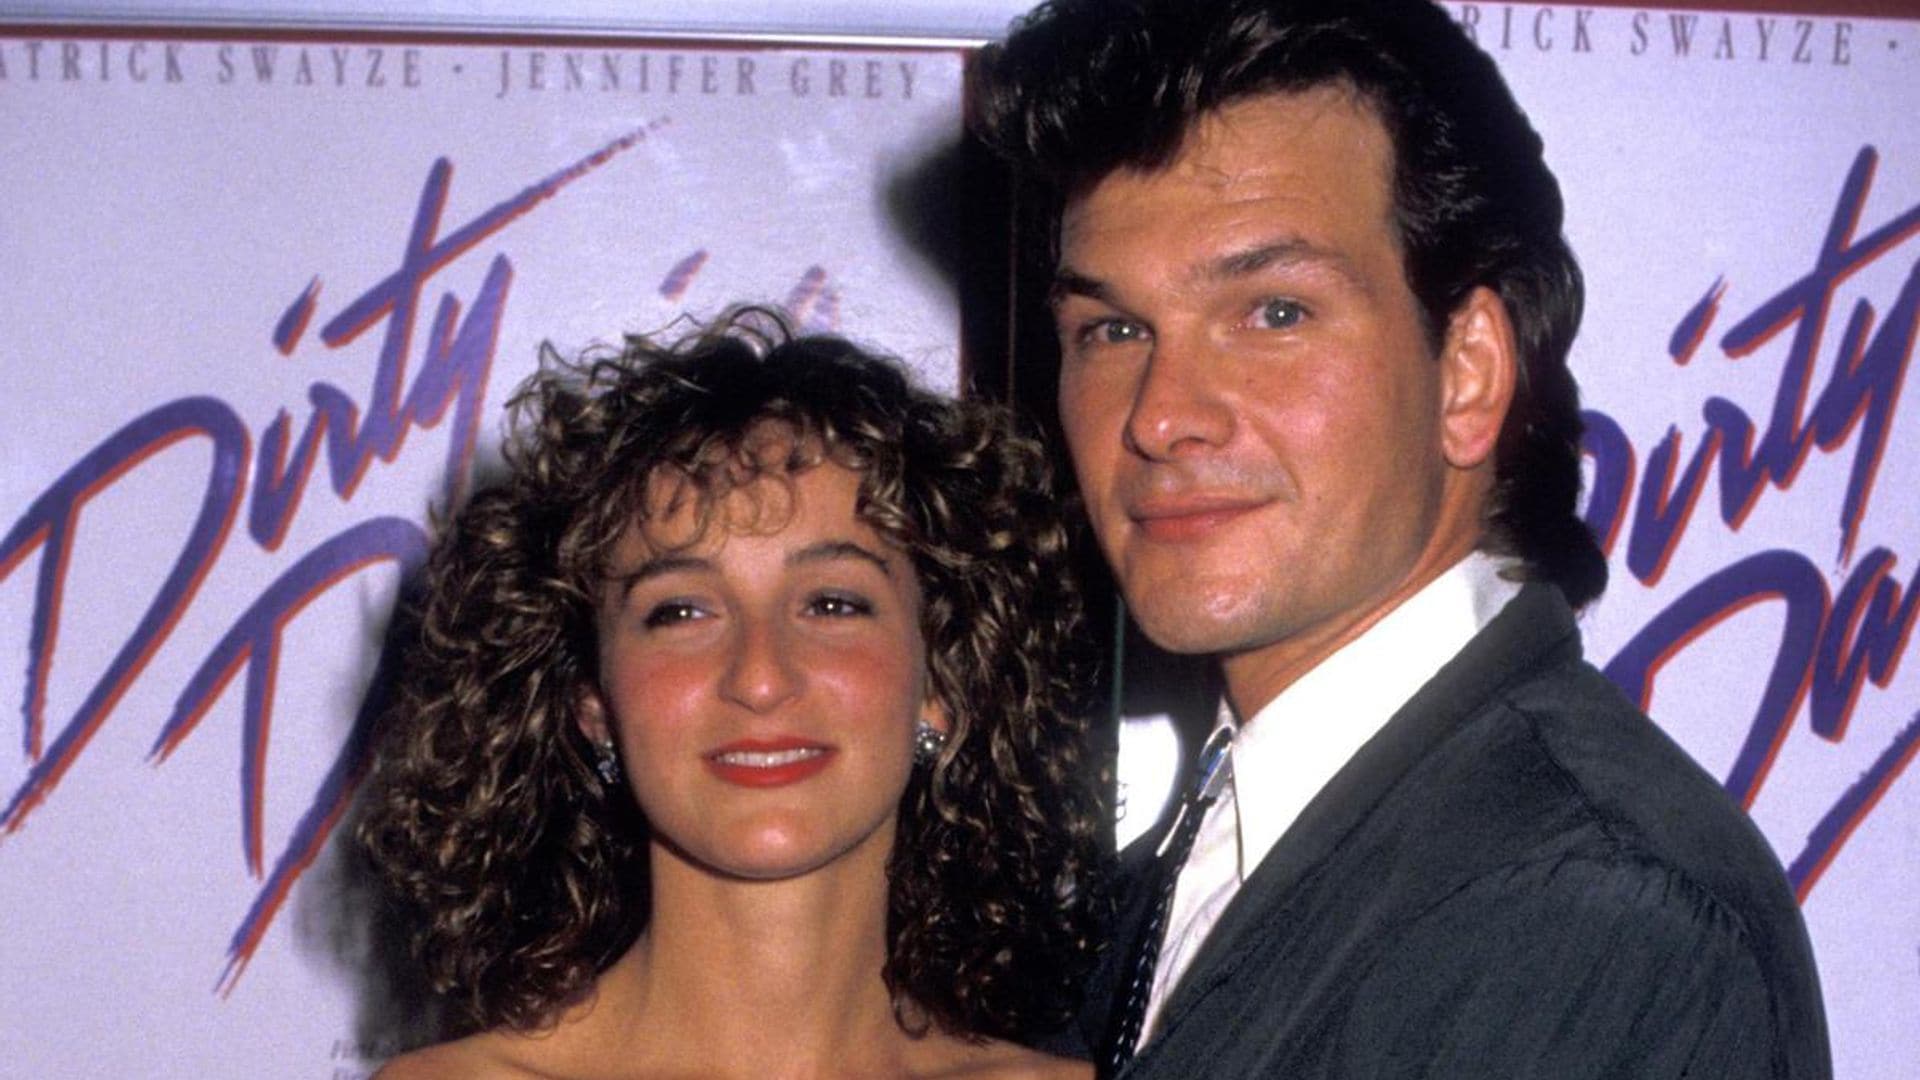 Jennifer Grey reveals why Patrick Swayze cried and apologized on ‘Dirty Dancing’ set in 1987